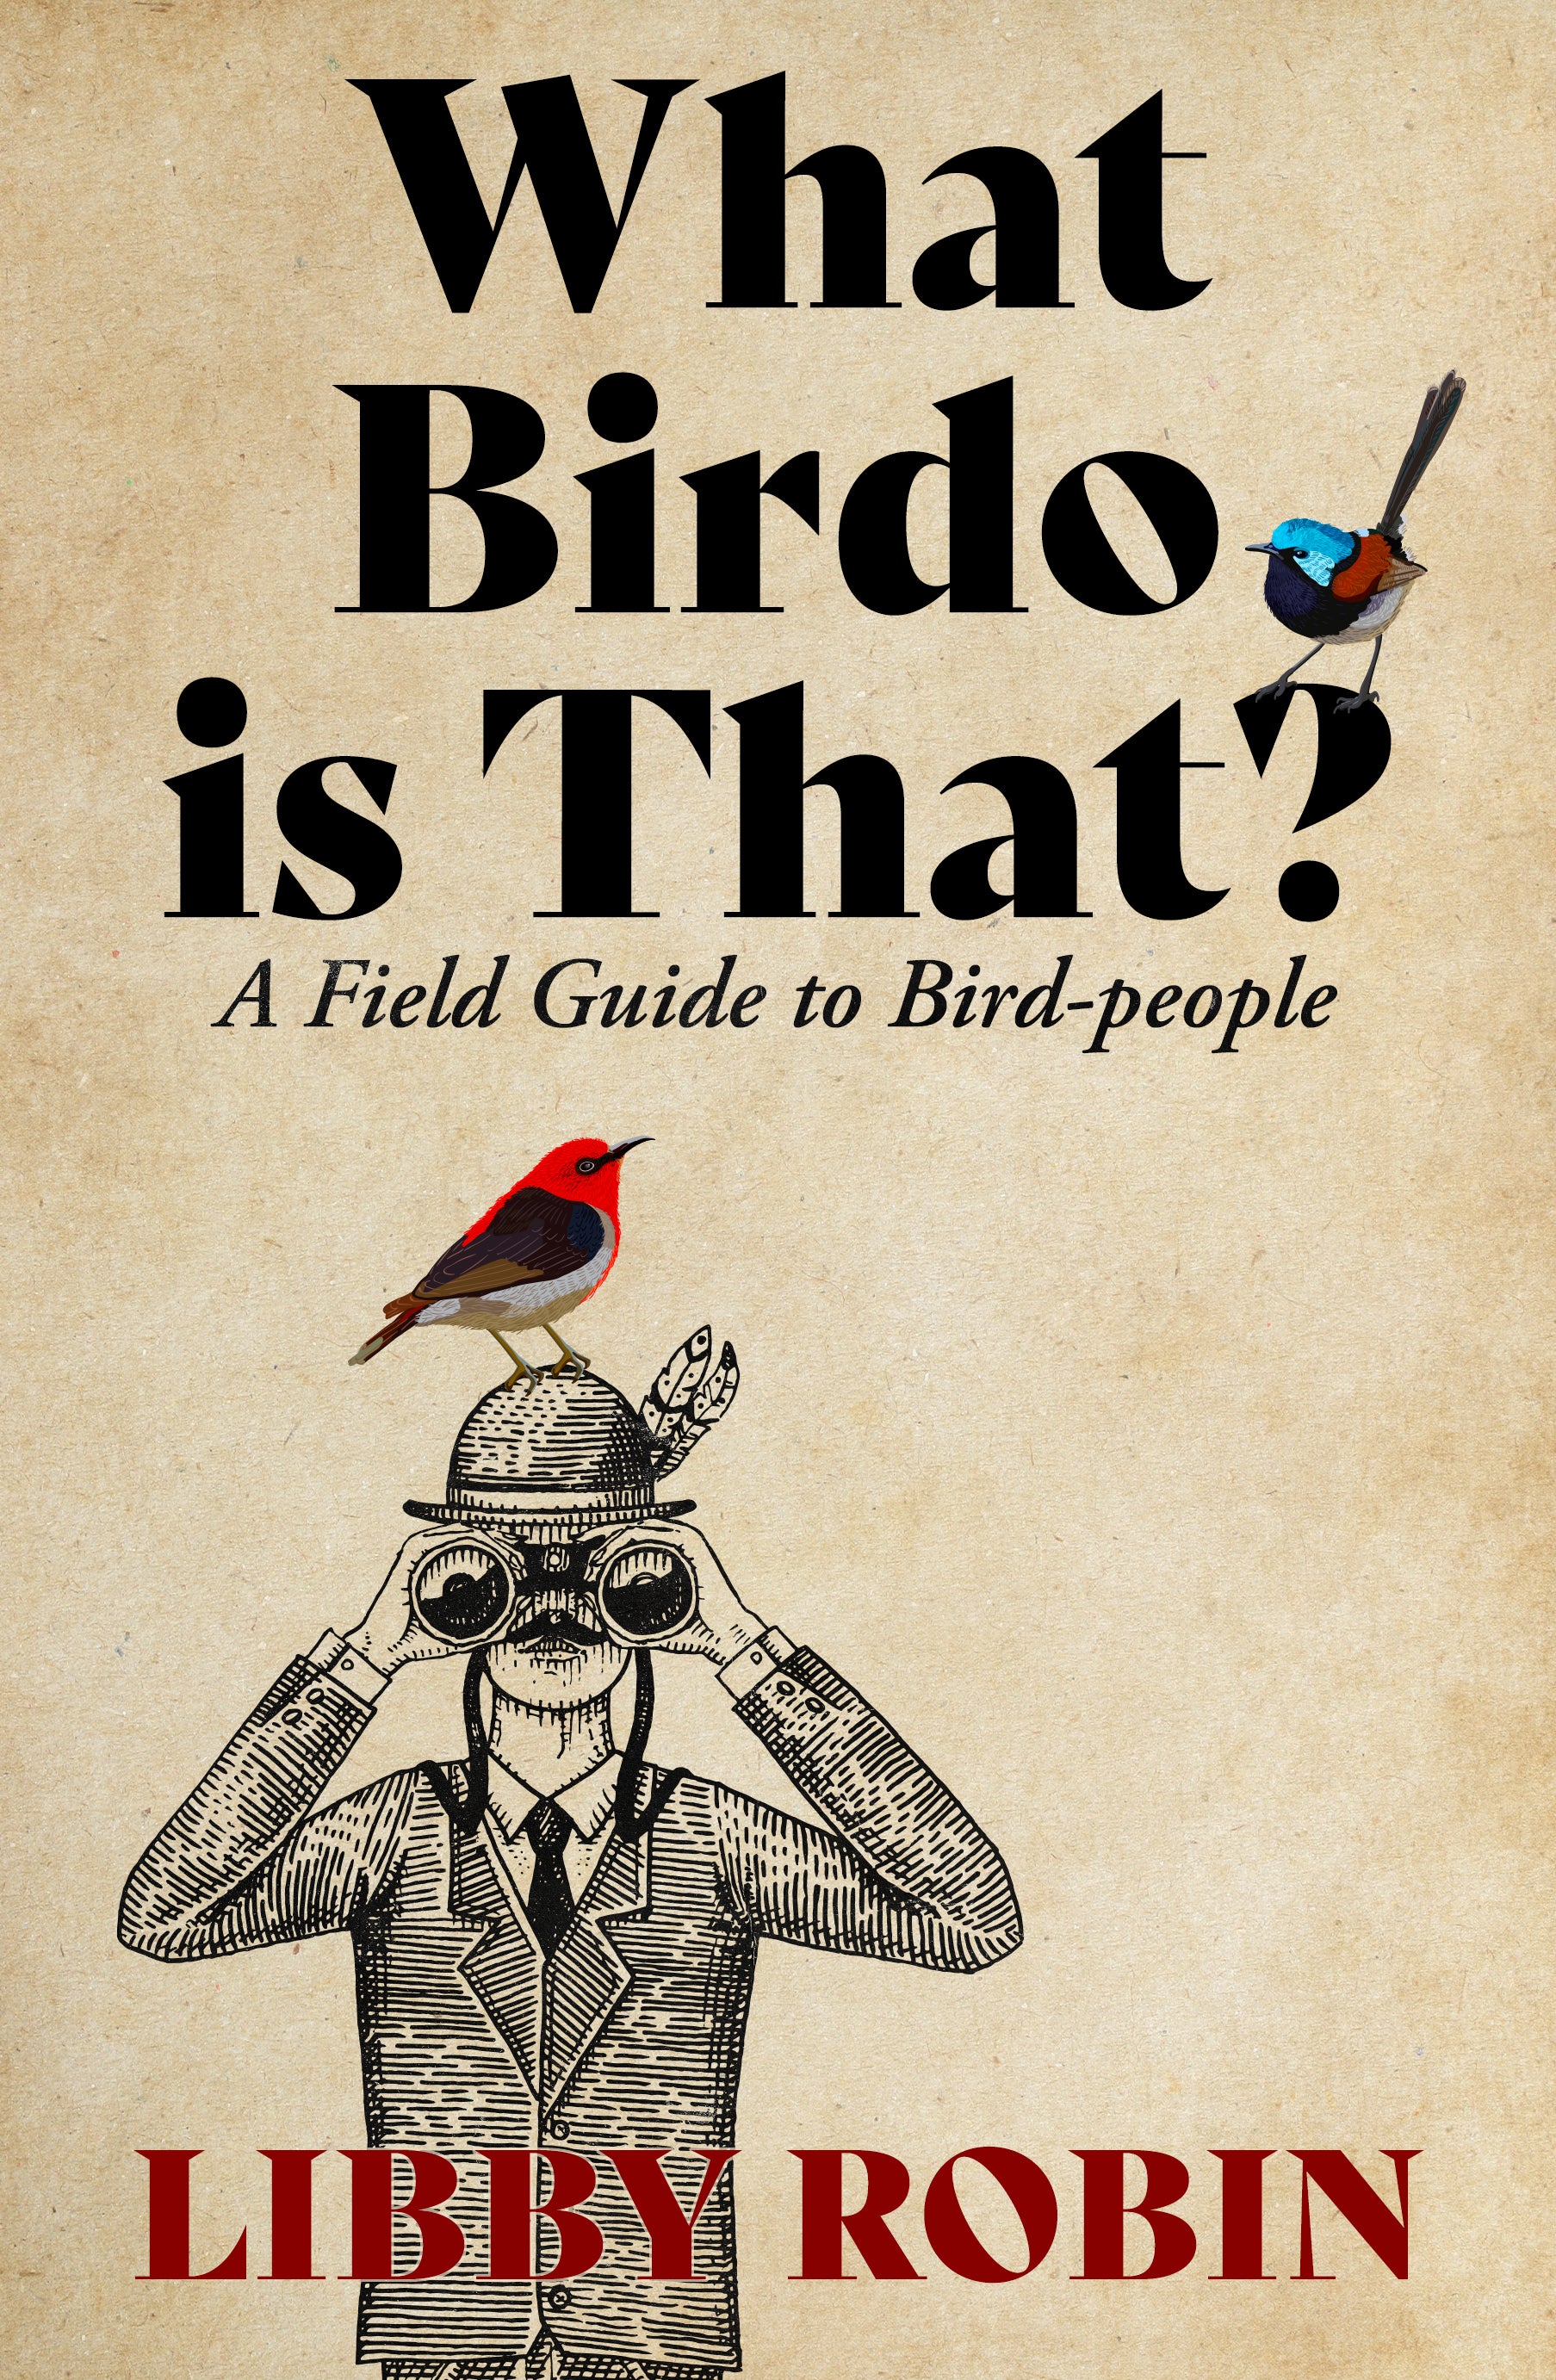 What Birdo is That? A Field Guide to Bird-people